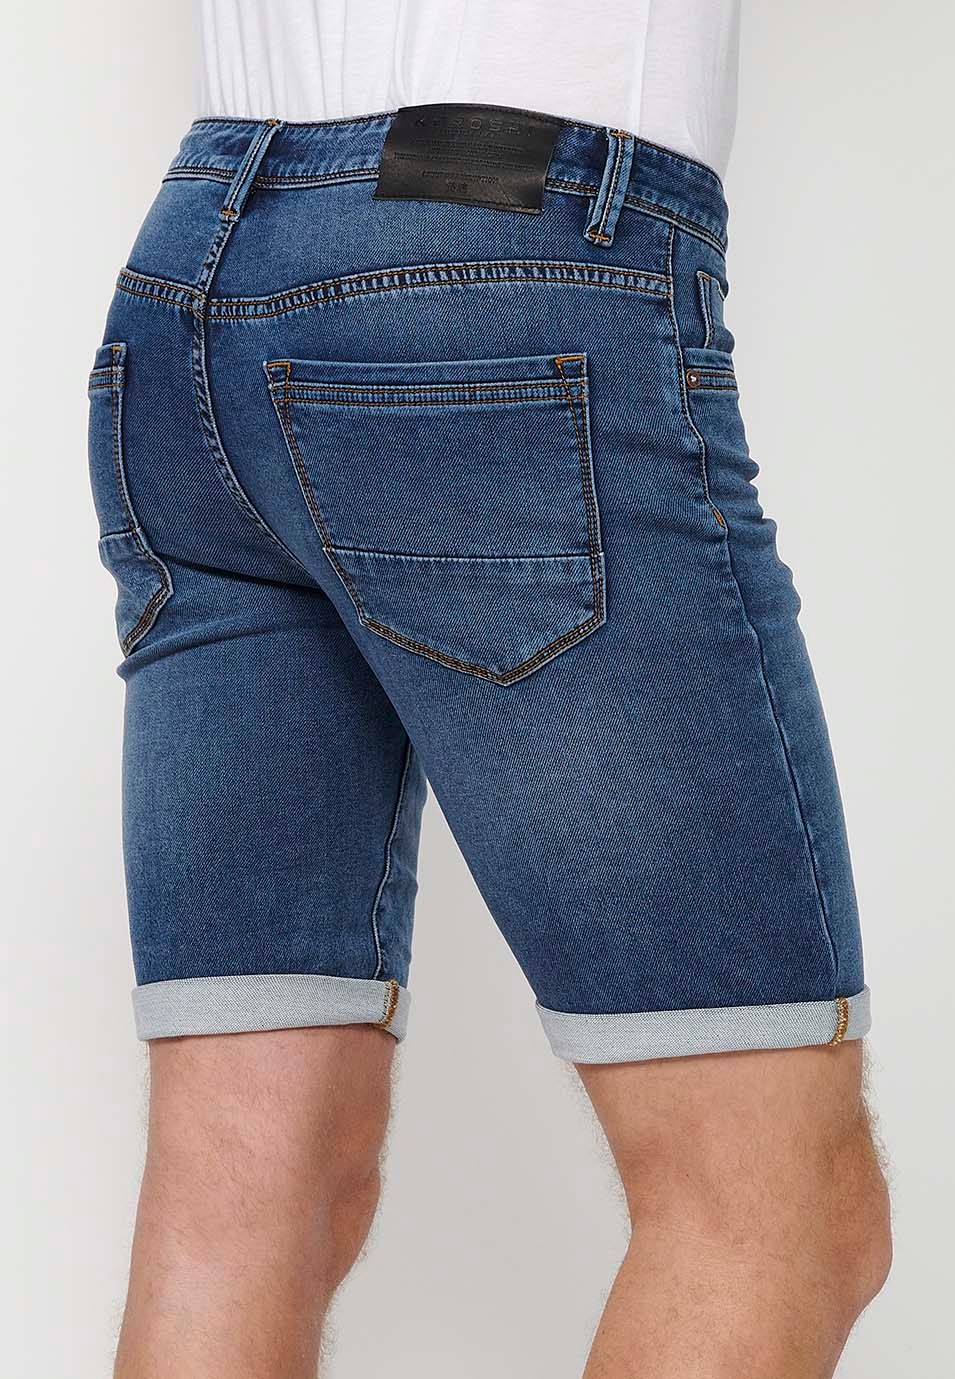 Shorts with turn-up finish with front closure with zipper and button in Blue for Men